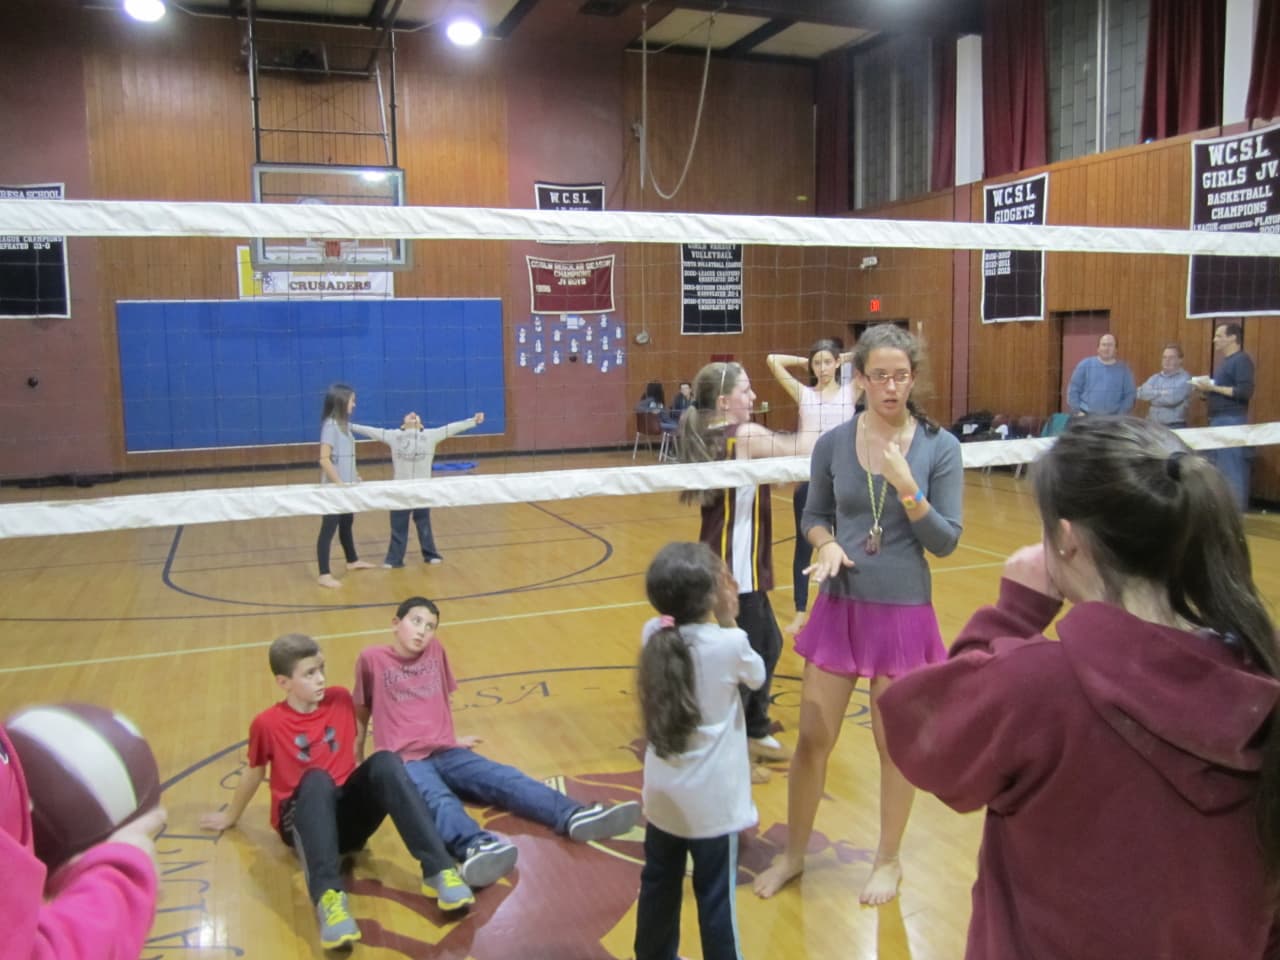 St. Theresa School alumnus Tara Hammonds, 16, organizes a volleyball game with community members and kids during "Occupy St. Theresa" Saturday night. 